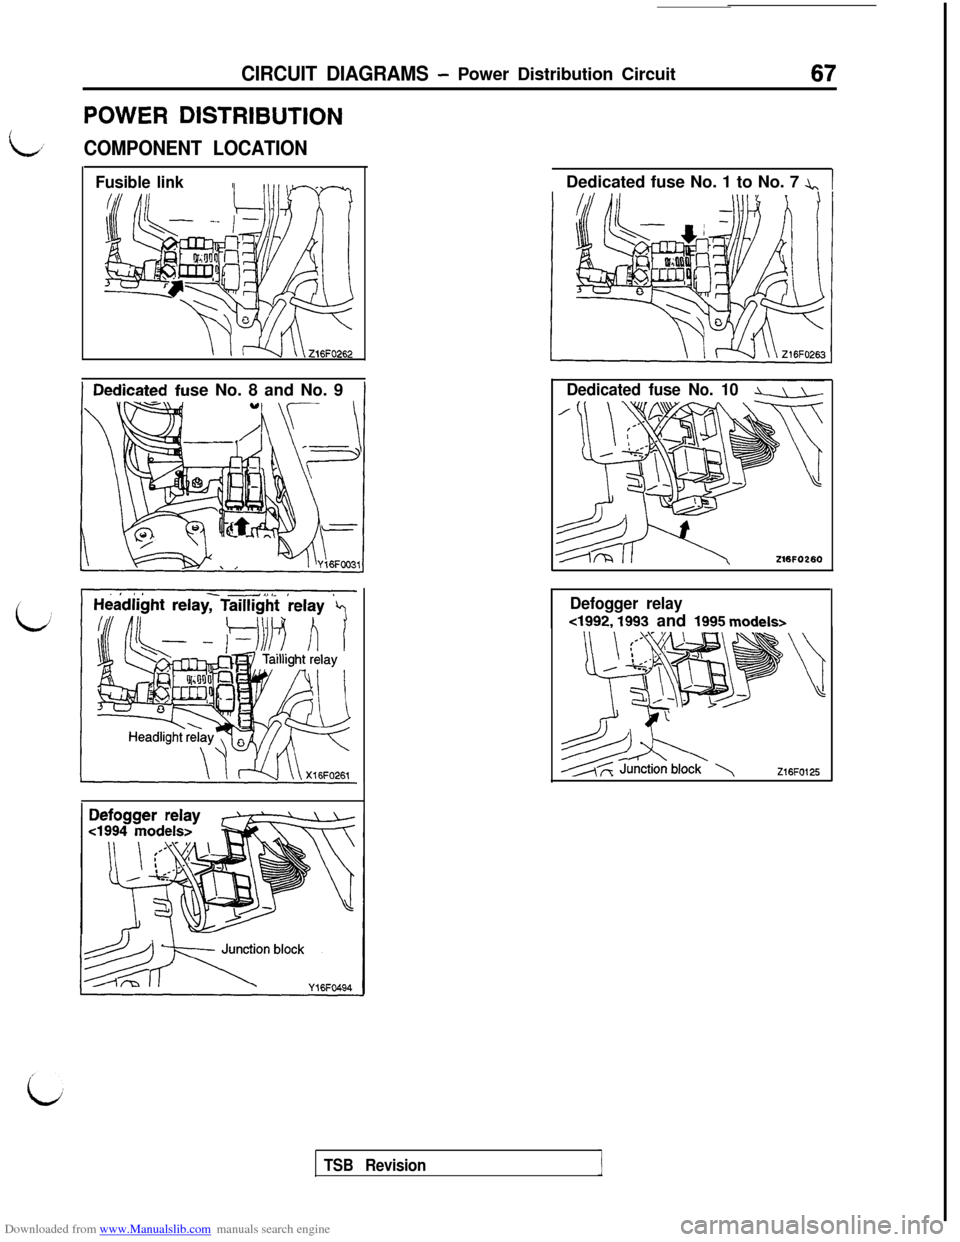 MITSUBISHI 3000GT 1993 2.G User Guide Downloaded from www.Manualslib.com manuals search engine CIRCUIT DIAGRAMS - Power Distribution Circuit67
POWER DISTRIBUTION
L,’COMPONENT LOCATION
Fusible linkse No. 8 and No. 9Dedicated fuse No. 1 t